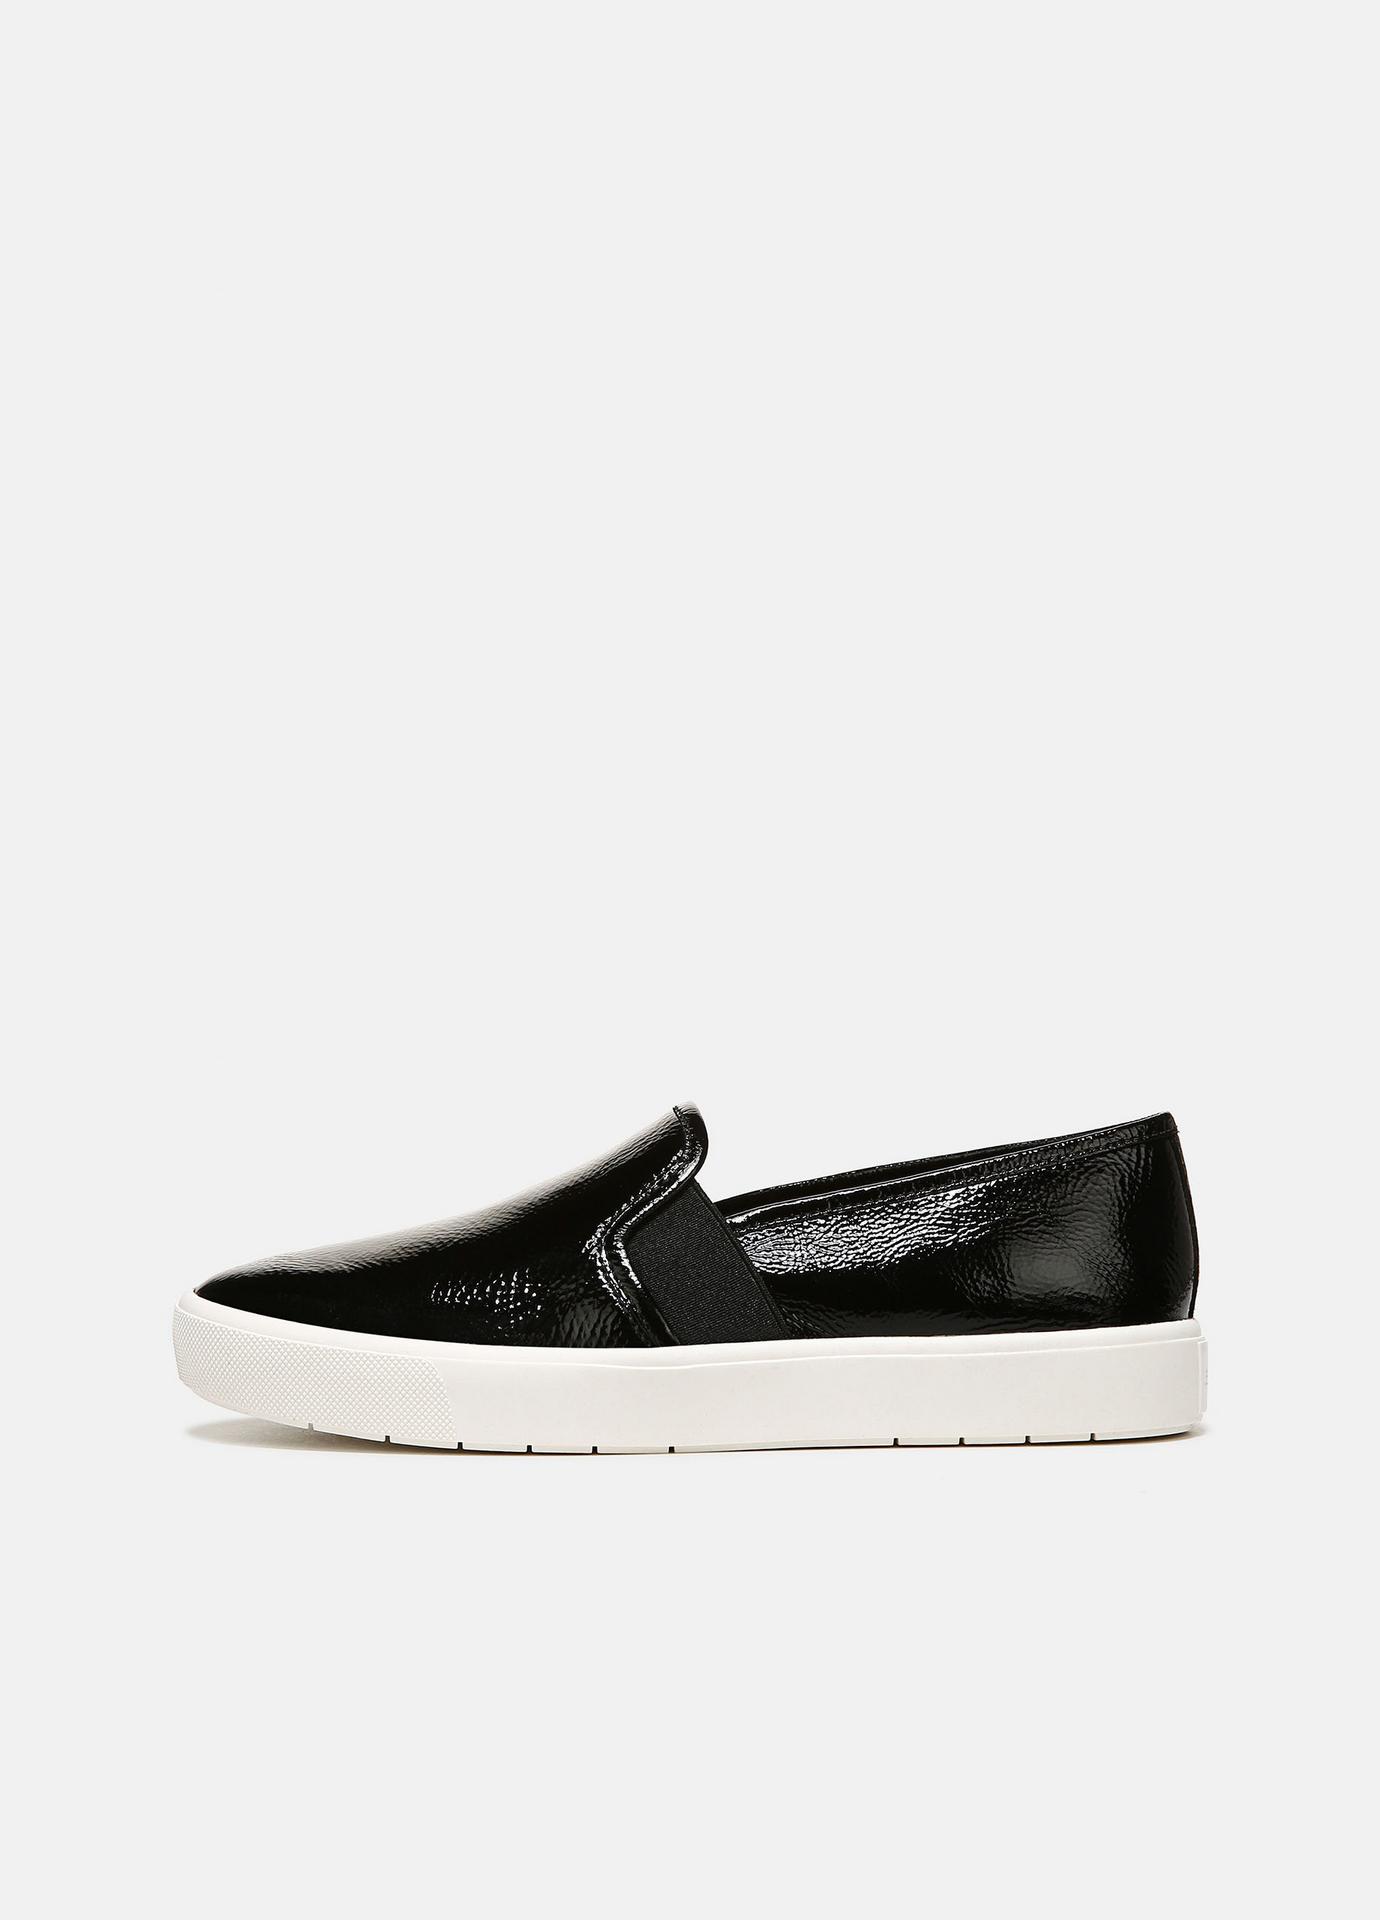 Vince Blair Patent Leather Sneaker